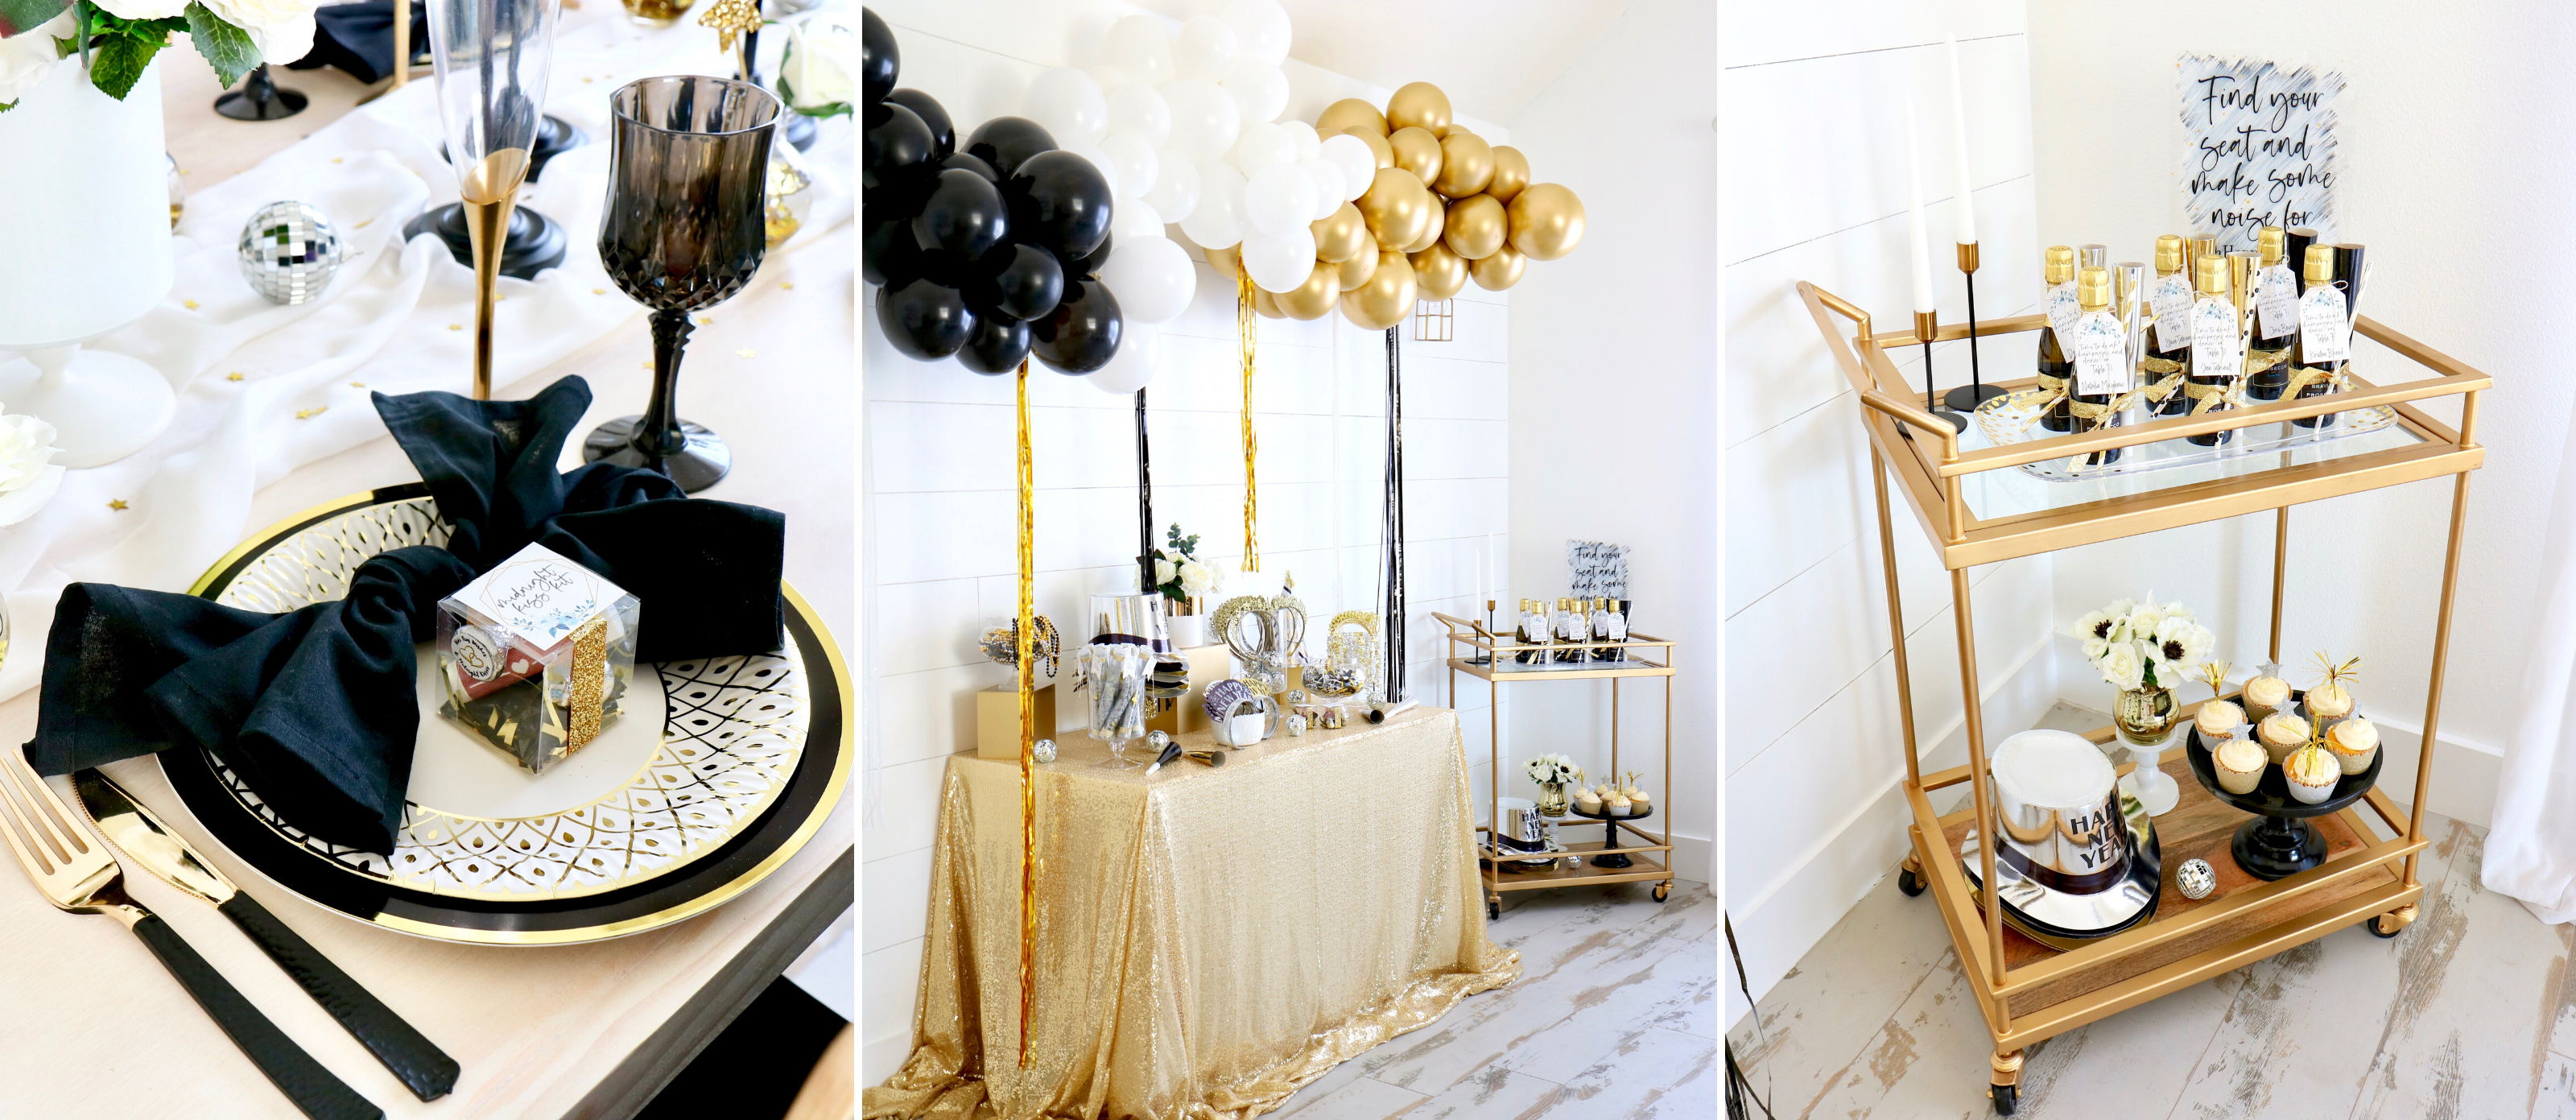 New Year's Eve Wedding Colours { Black Gold and White }  New years eve  weddings, Wedding colors, Gold wedding colors